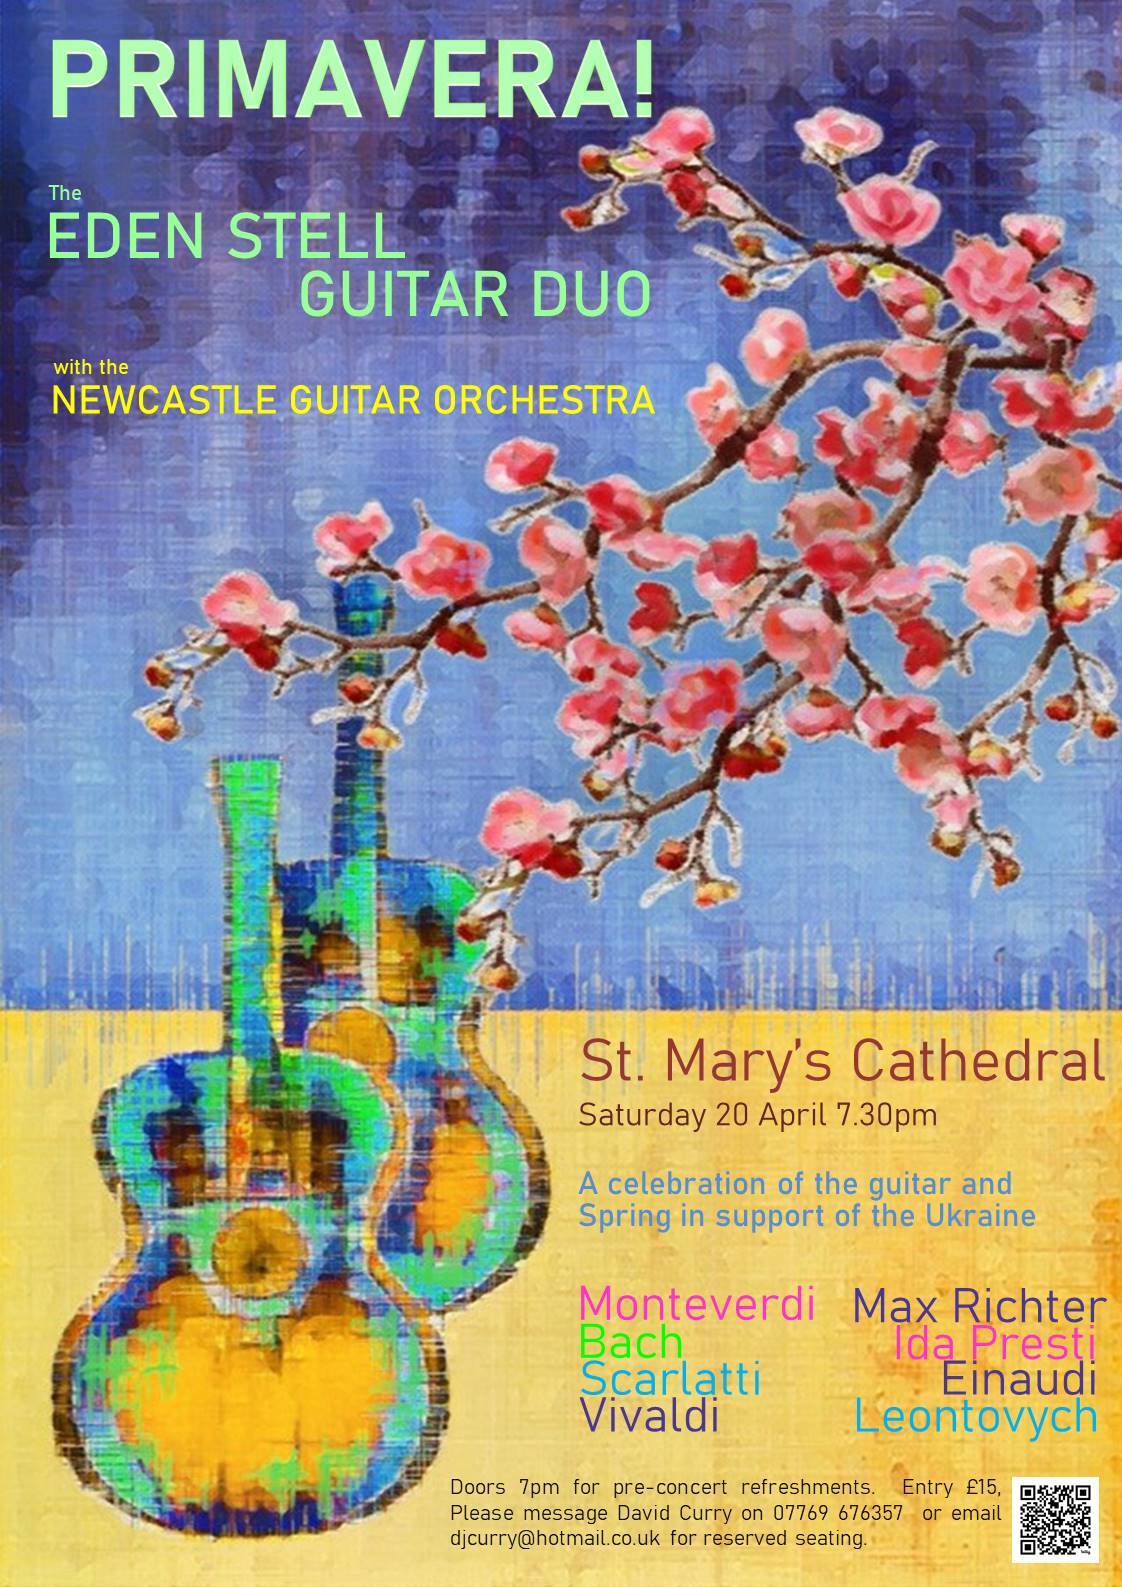 Primavera! Eden Stell Guitar Duo with the Newcastle Guitar Orchestra